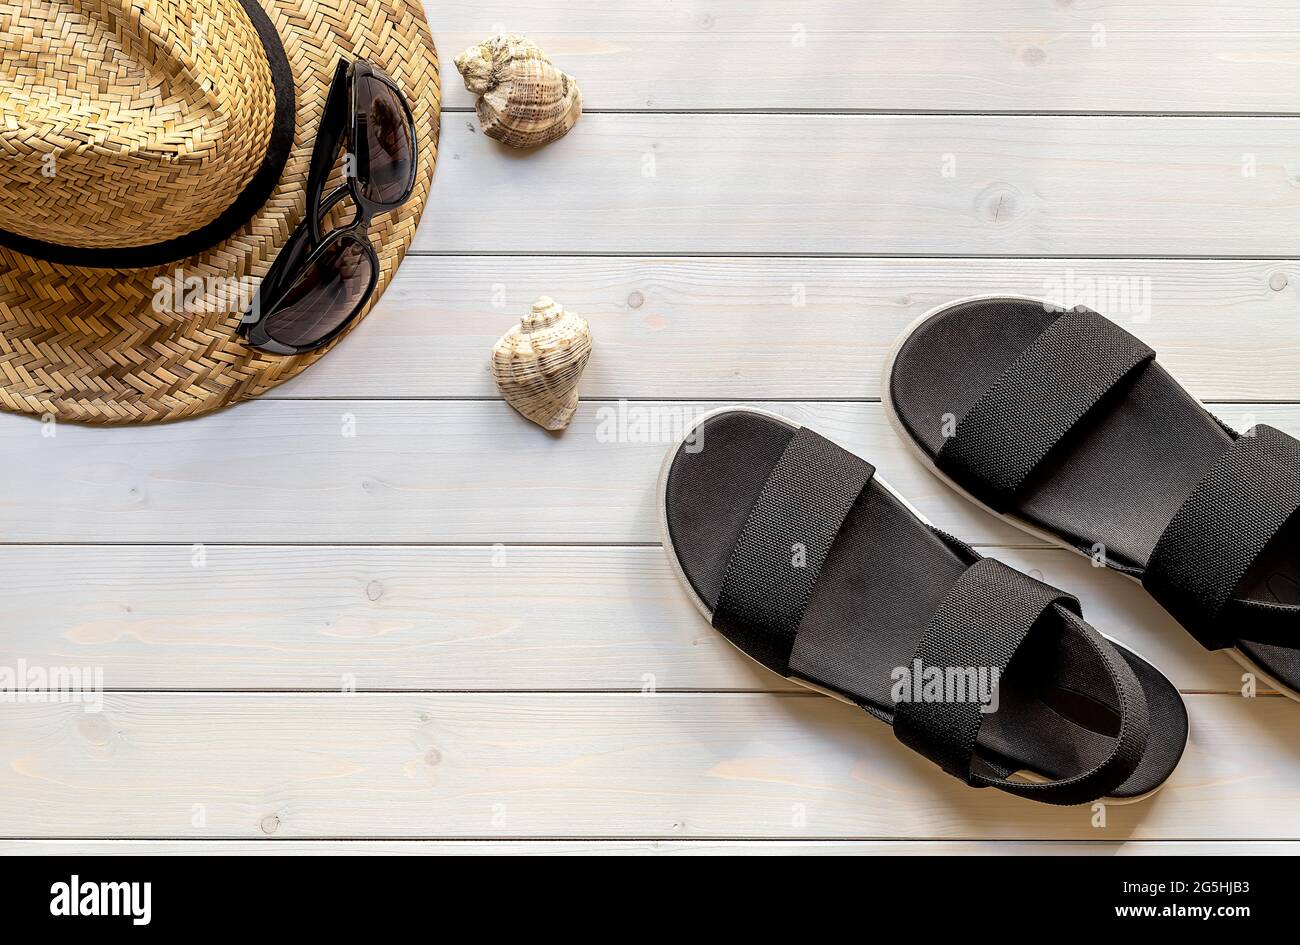 Women's open-toe black sandals from recycled plastic fibers, straw hat, sunglasses, and seashells  Stock Photo